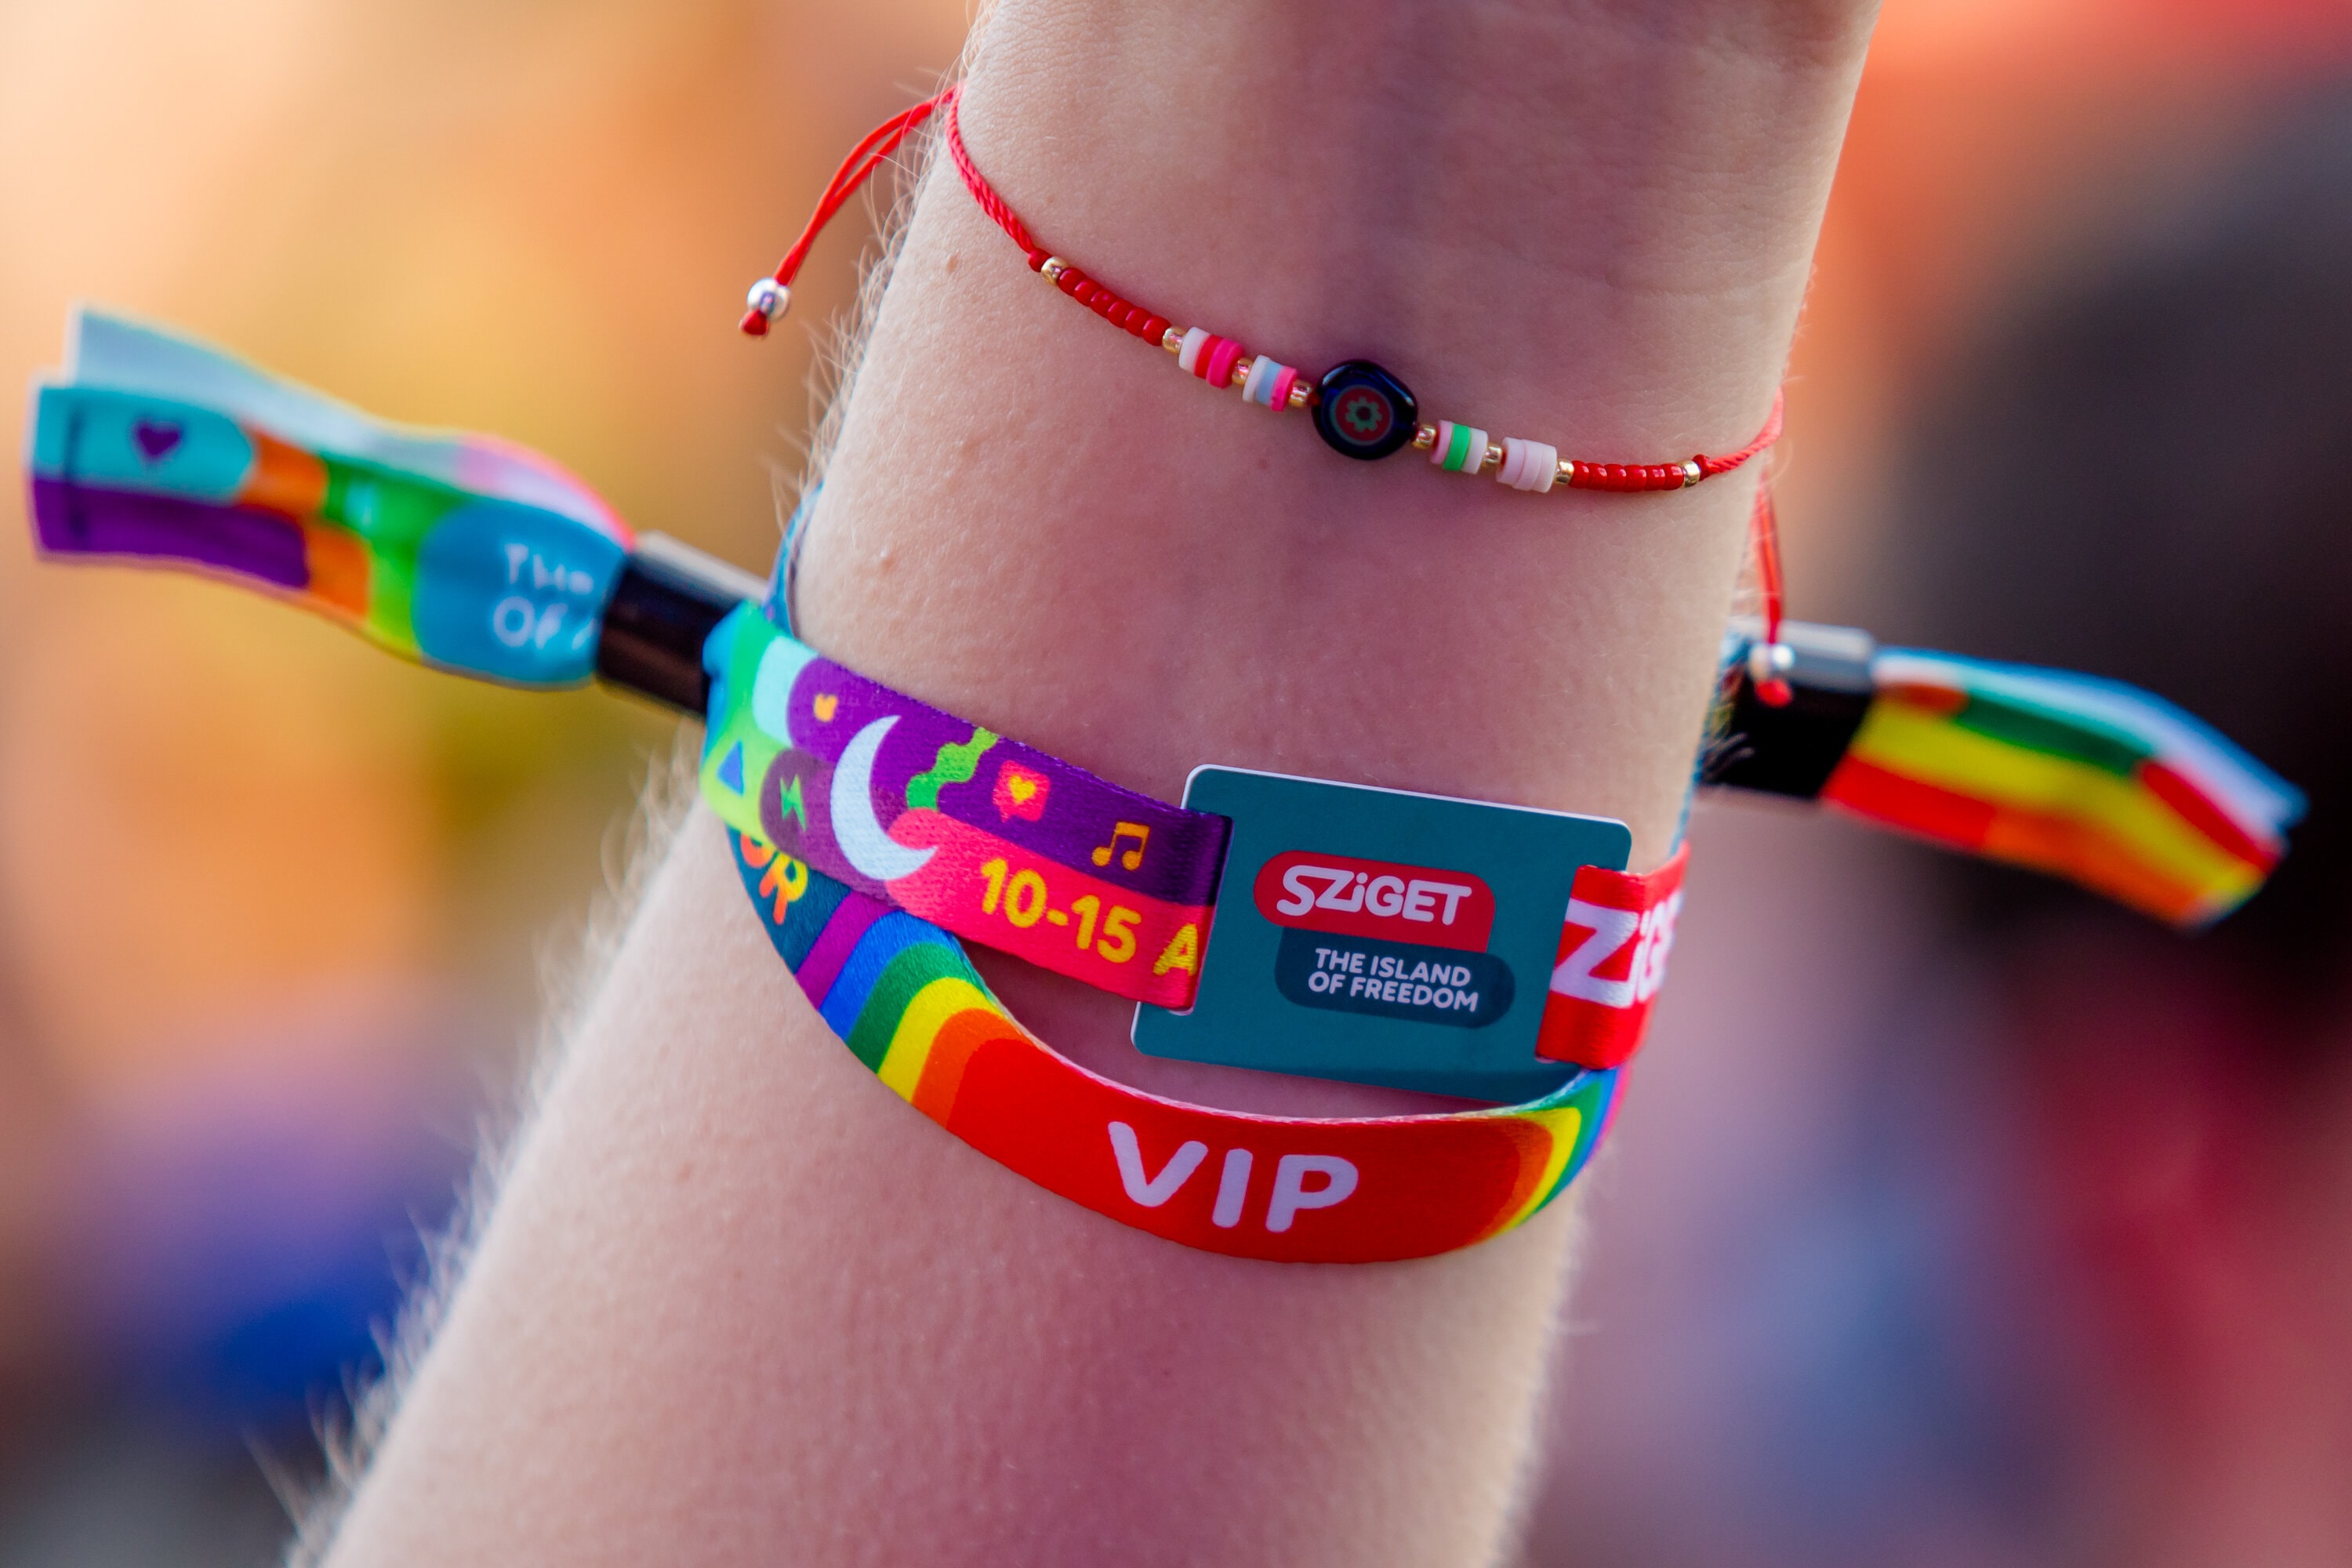 Close-up photo of the Sziget festival VIP ticket wristband